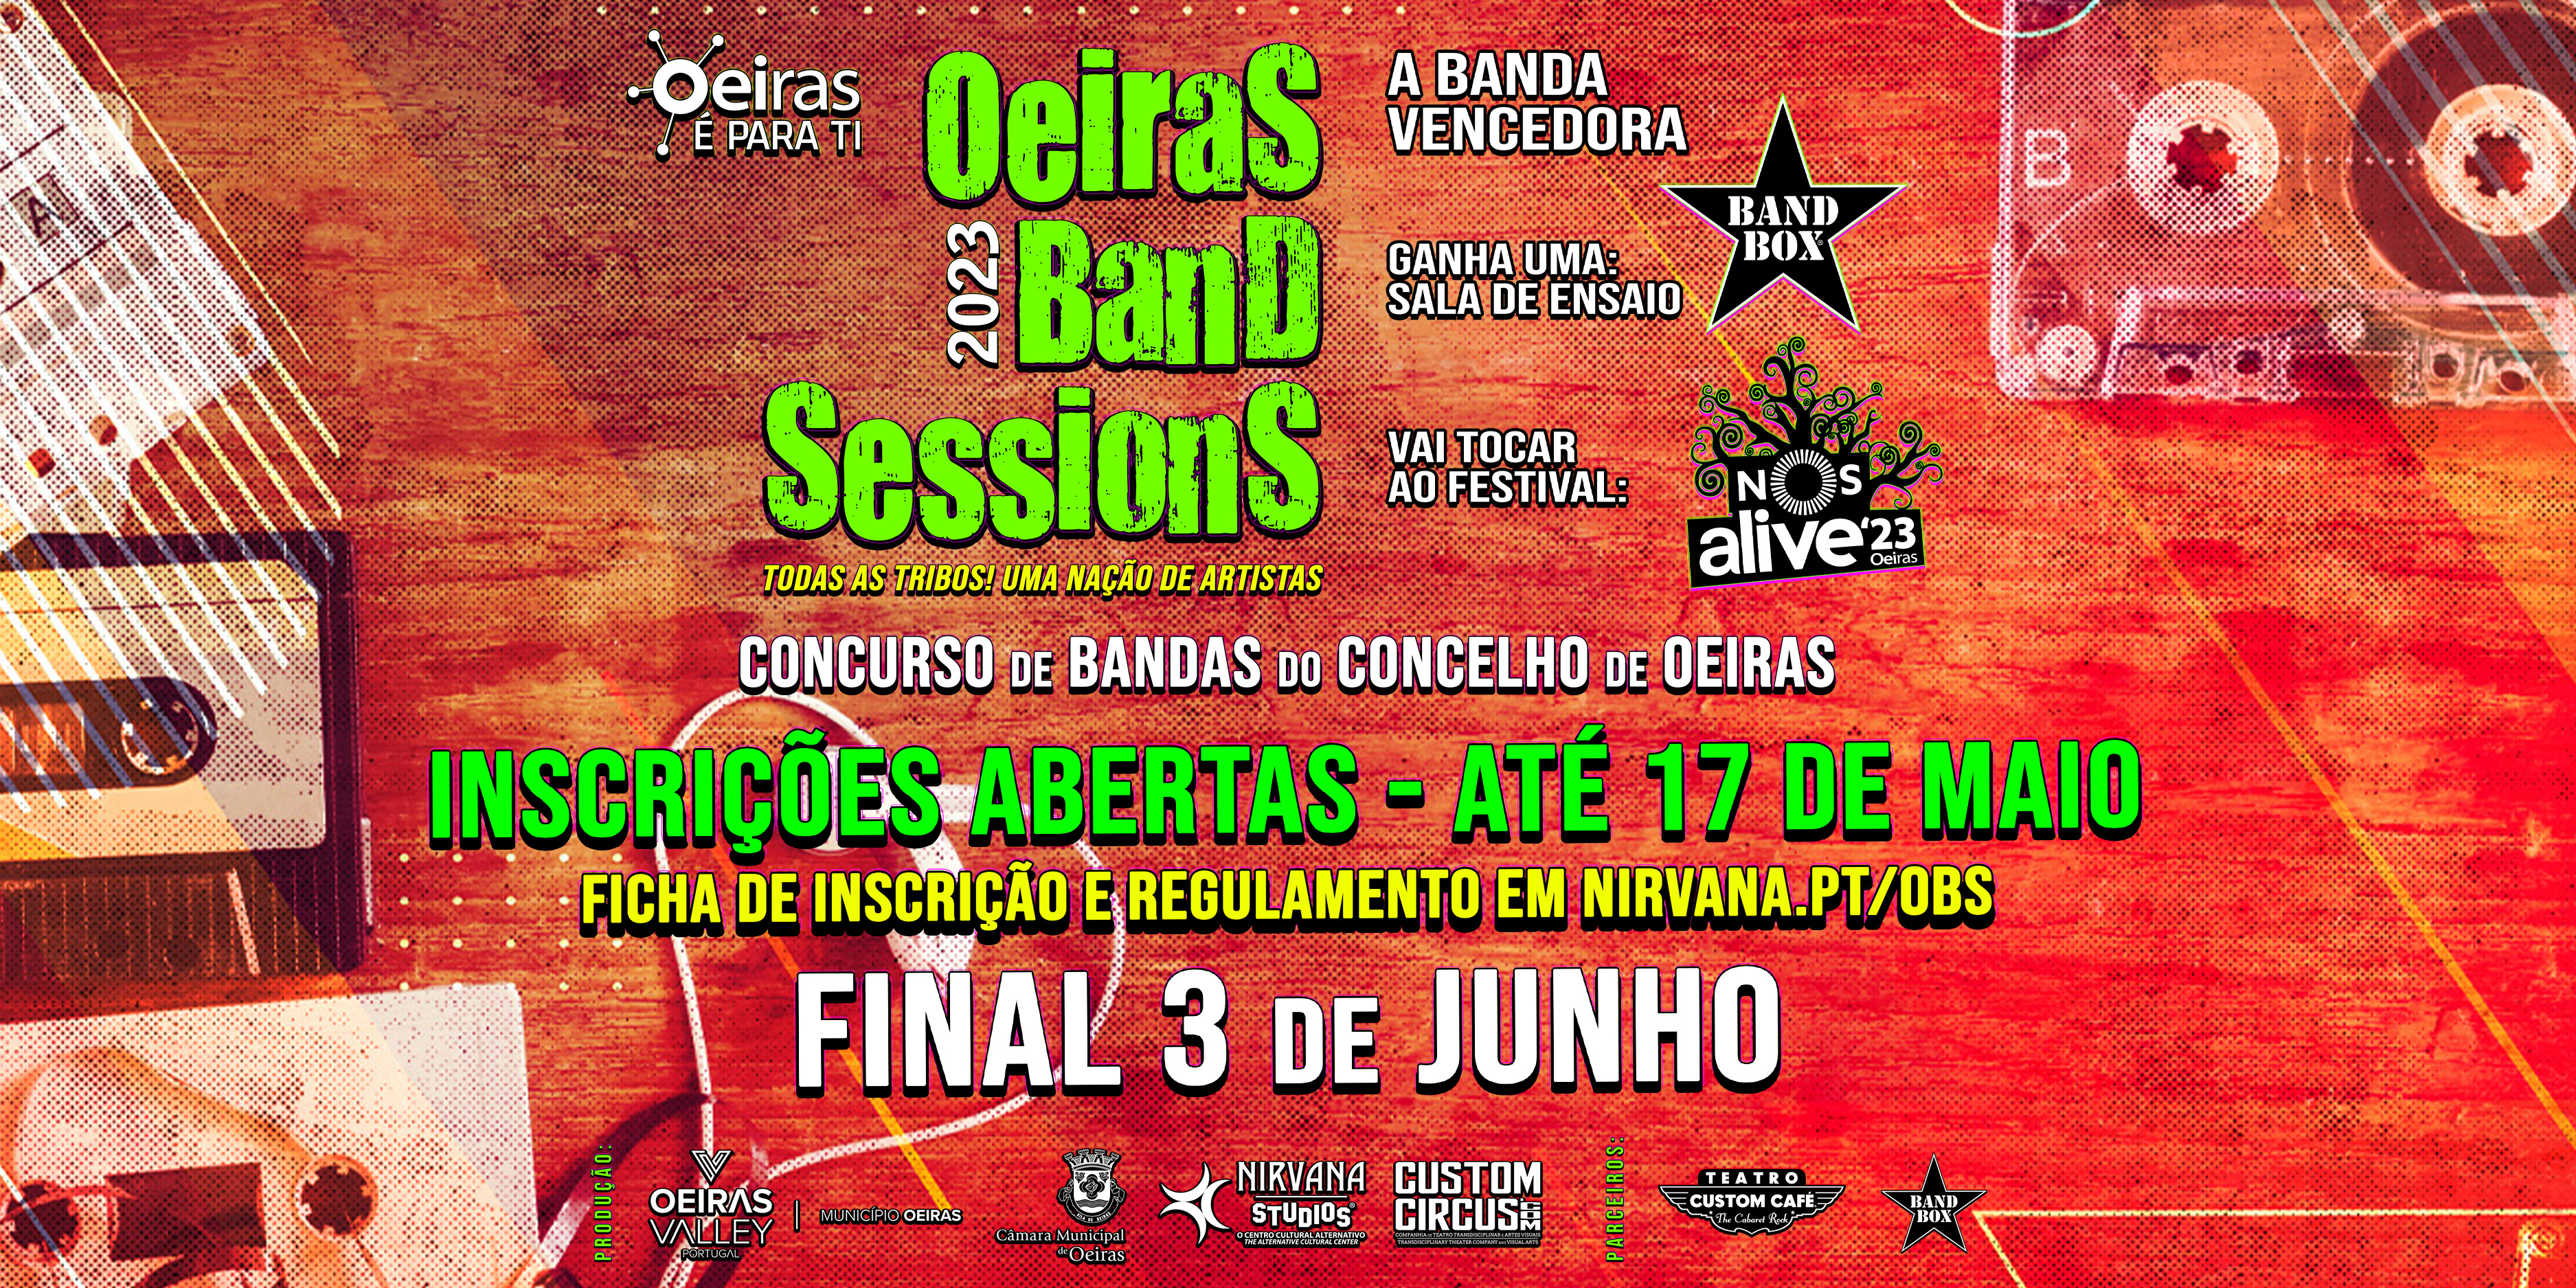 Oeiras band sessions